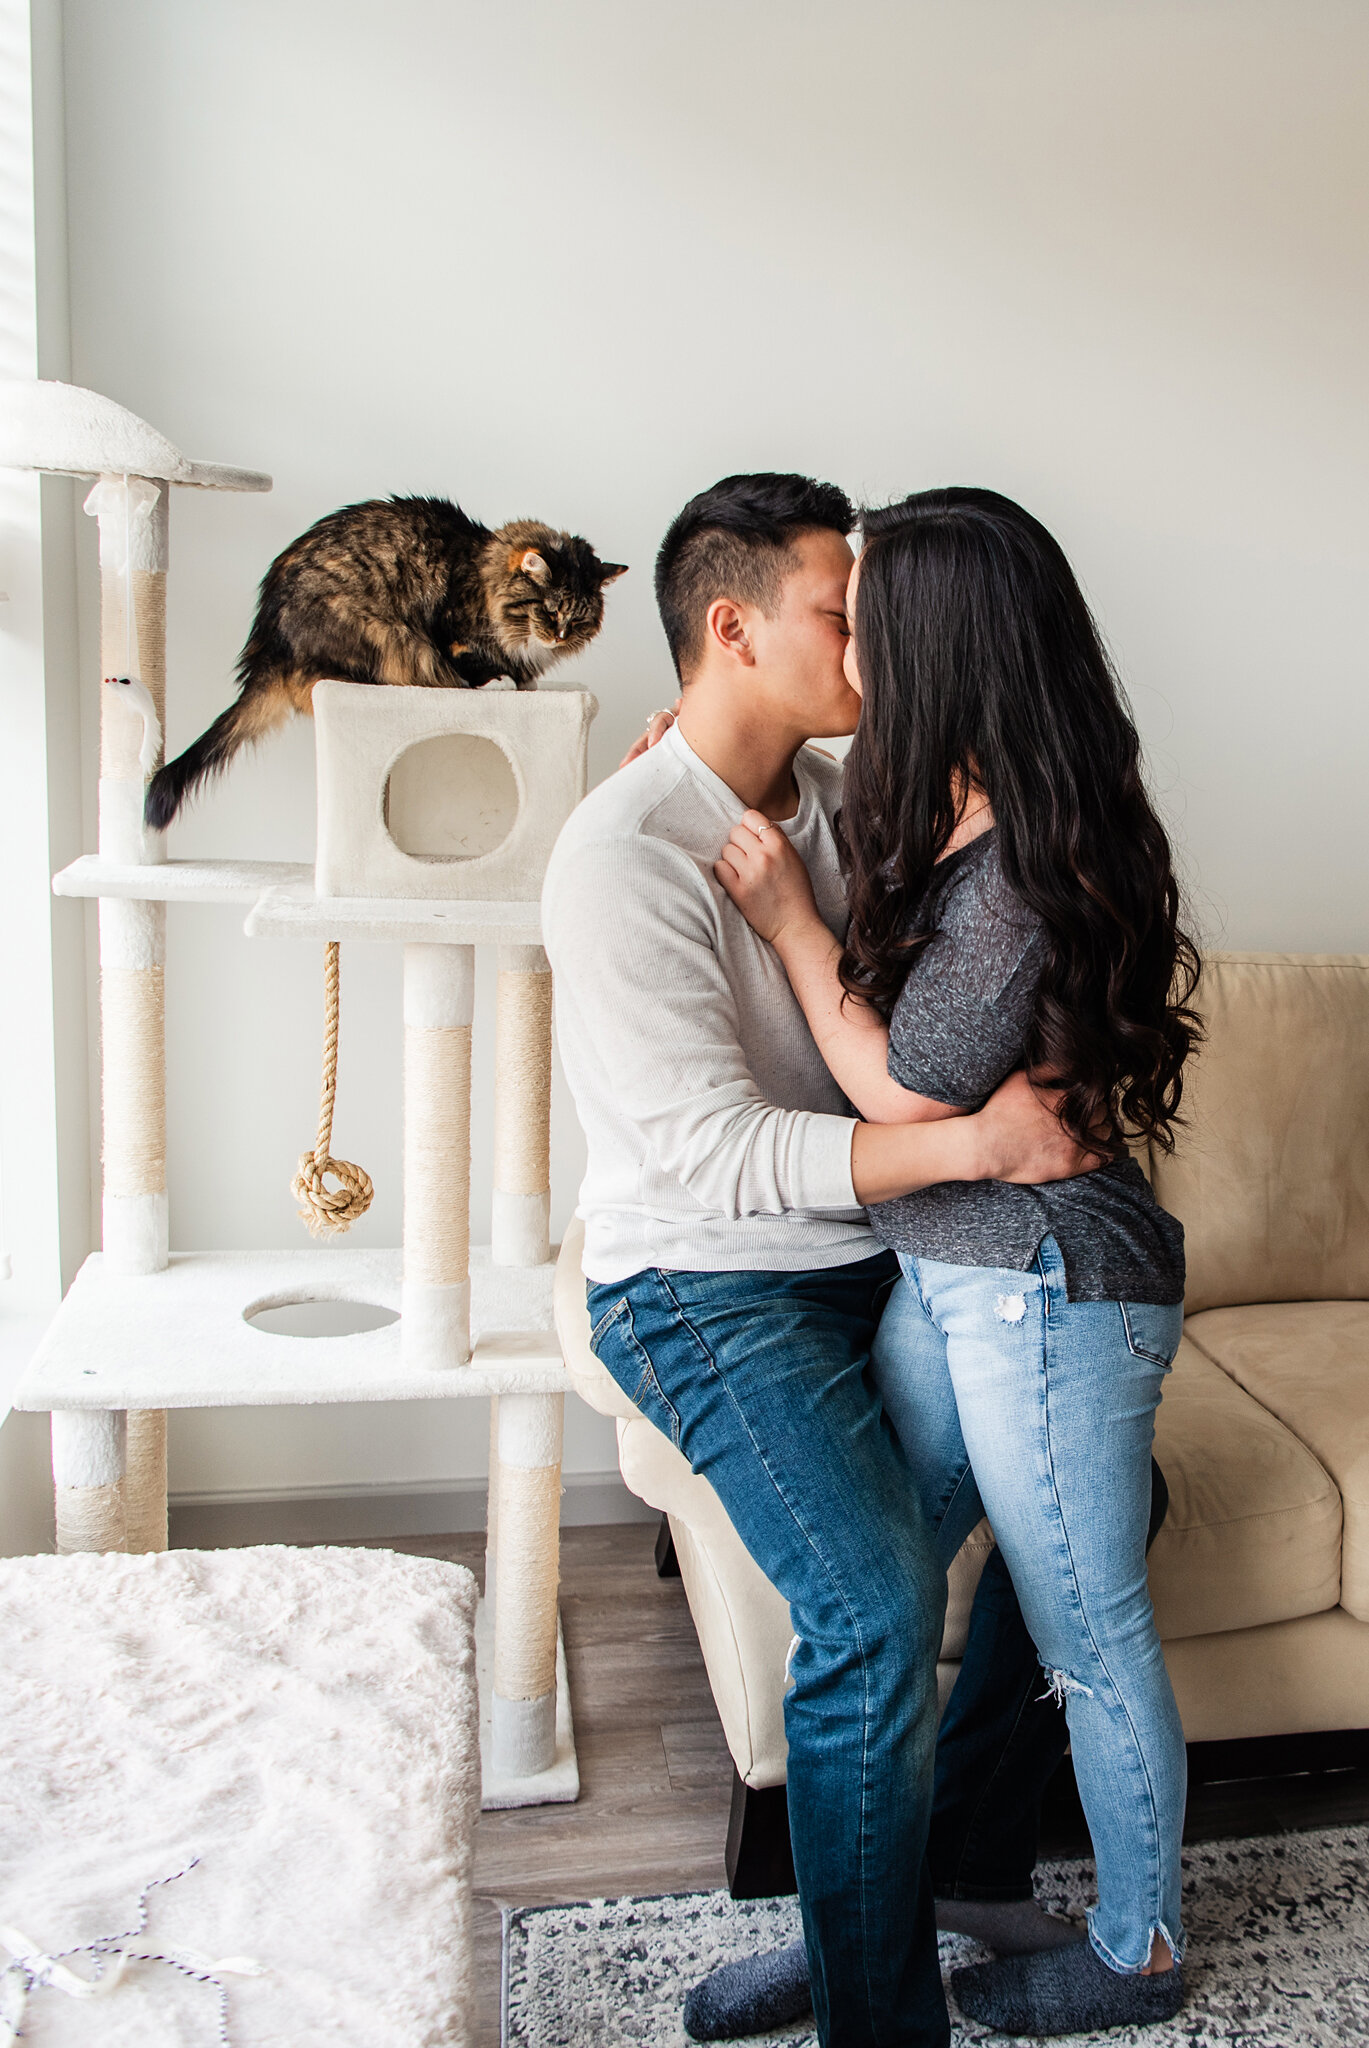 In_Home_Rochester_Couples_Session_JILL_STUDIO_Rochester_NY_Photographer_4138.jpg